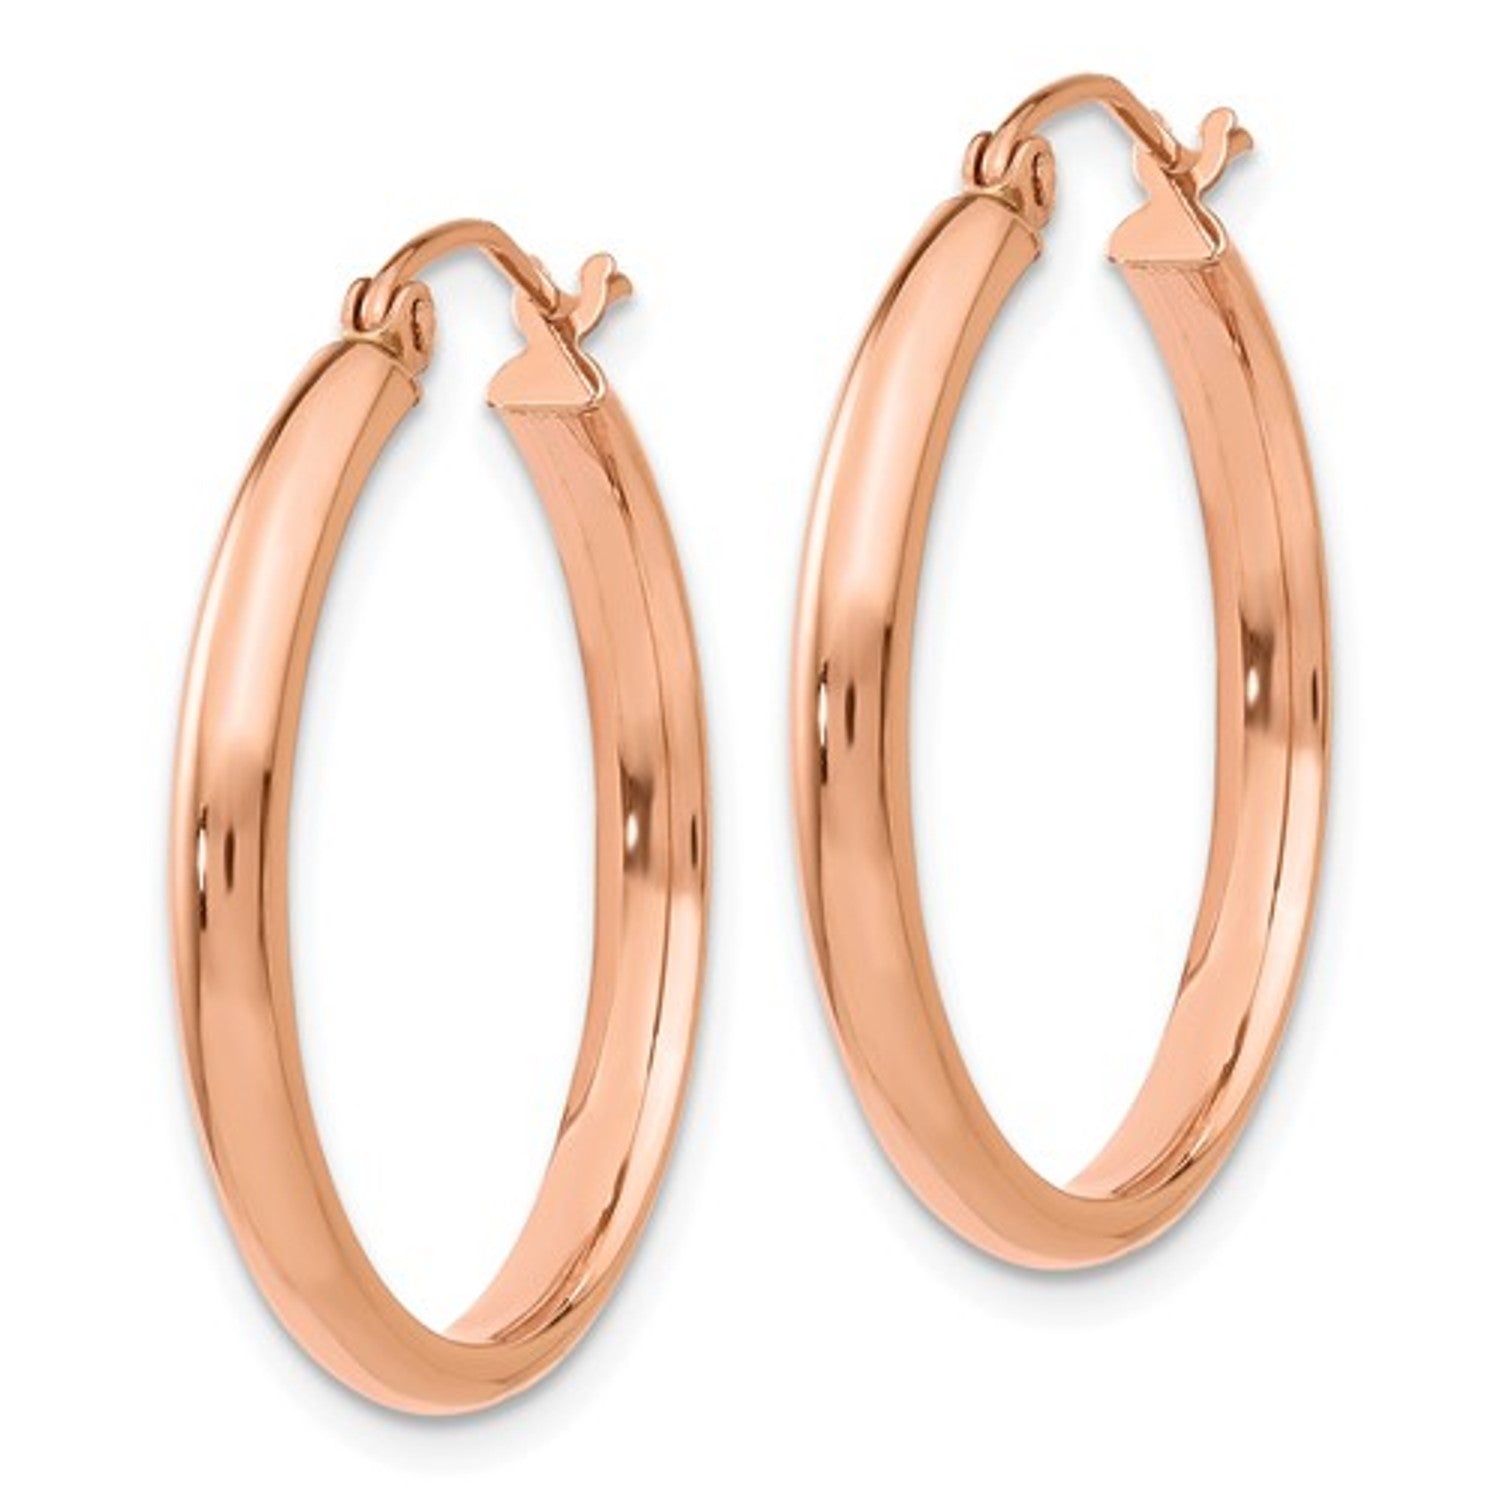 14K Rose Gold Classic Round Hoop Earrings 25mm x 2.75mm